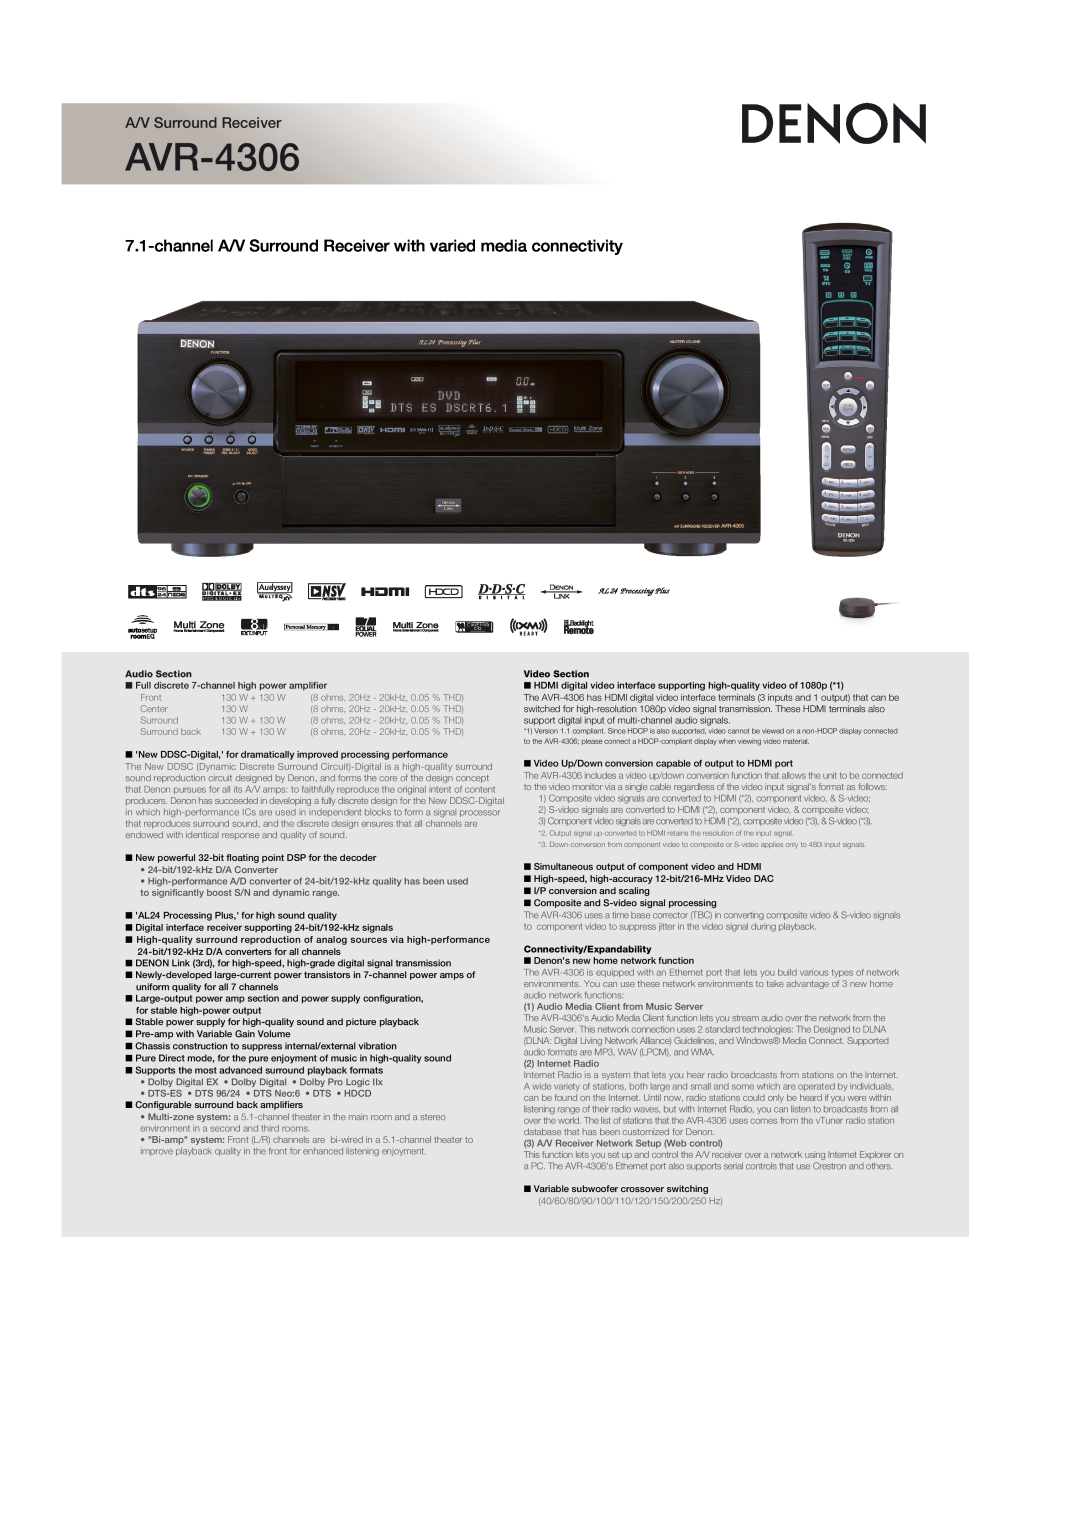 Denon AVR-4306 manual Video Section, Connectivity/Expandability, A/V Surround Receiver, Audio Section, Front, W + 130 W 